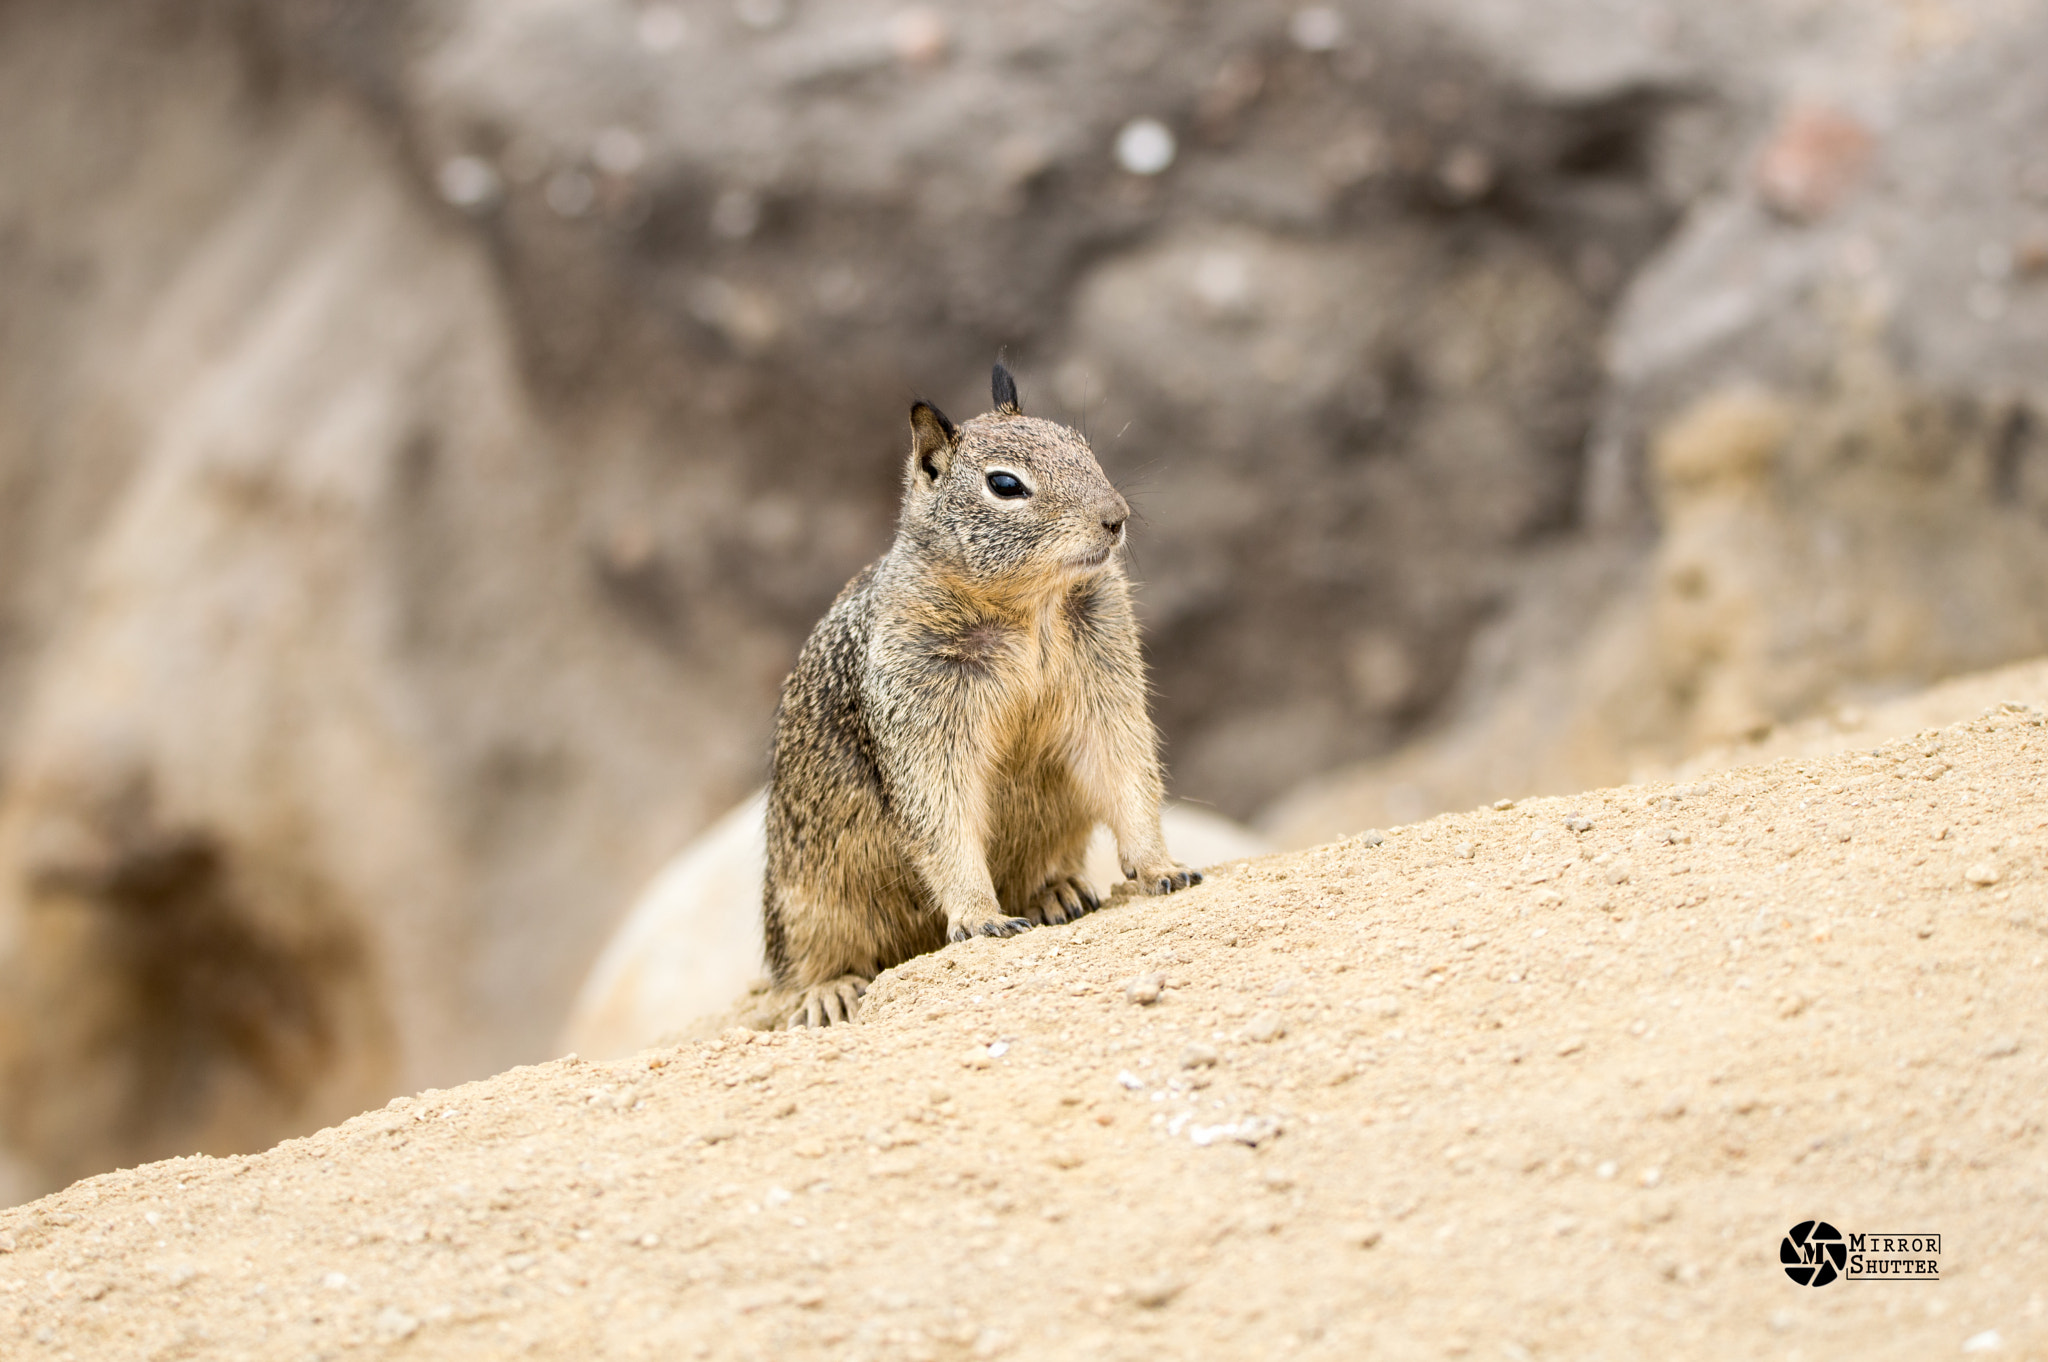 Nikon D3200 + Sigma 150-600mm F5-6.3 DG OS HSM | C sample photo. "hello there" - squirrel photography